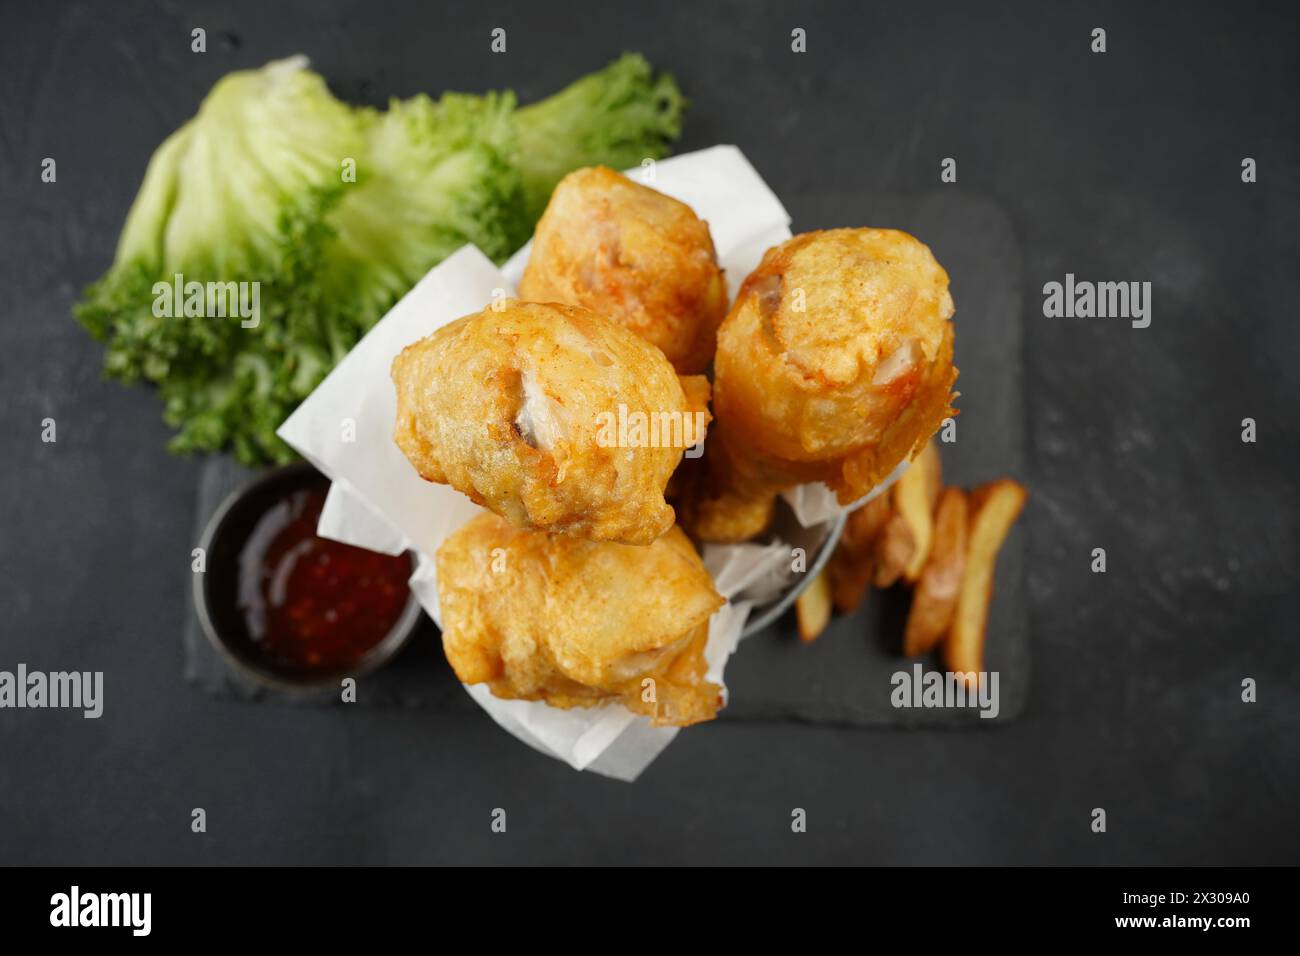 Fried chicken drumsticks in batter with hot sauce and lettuce Stock Photo